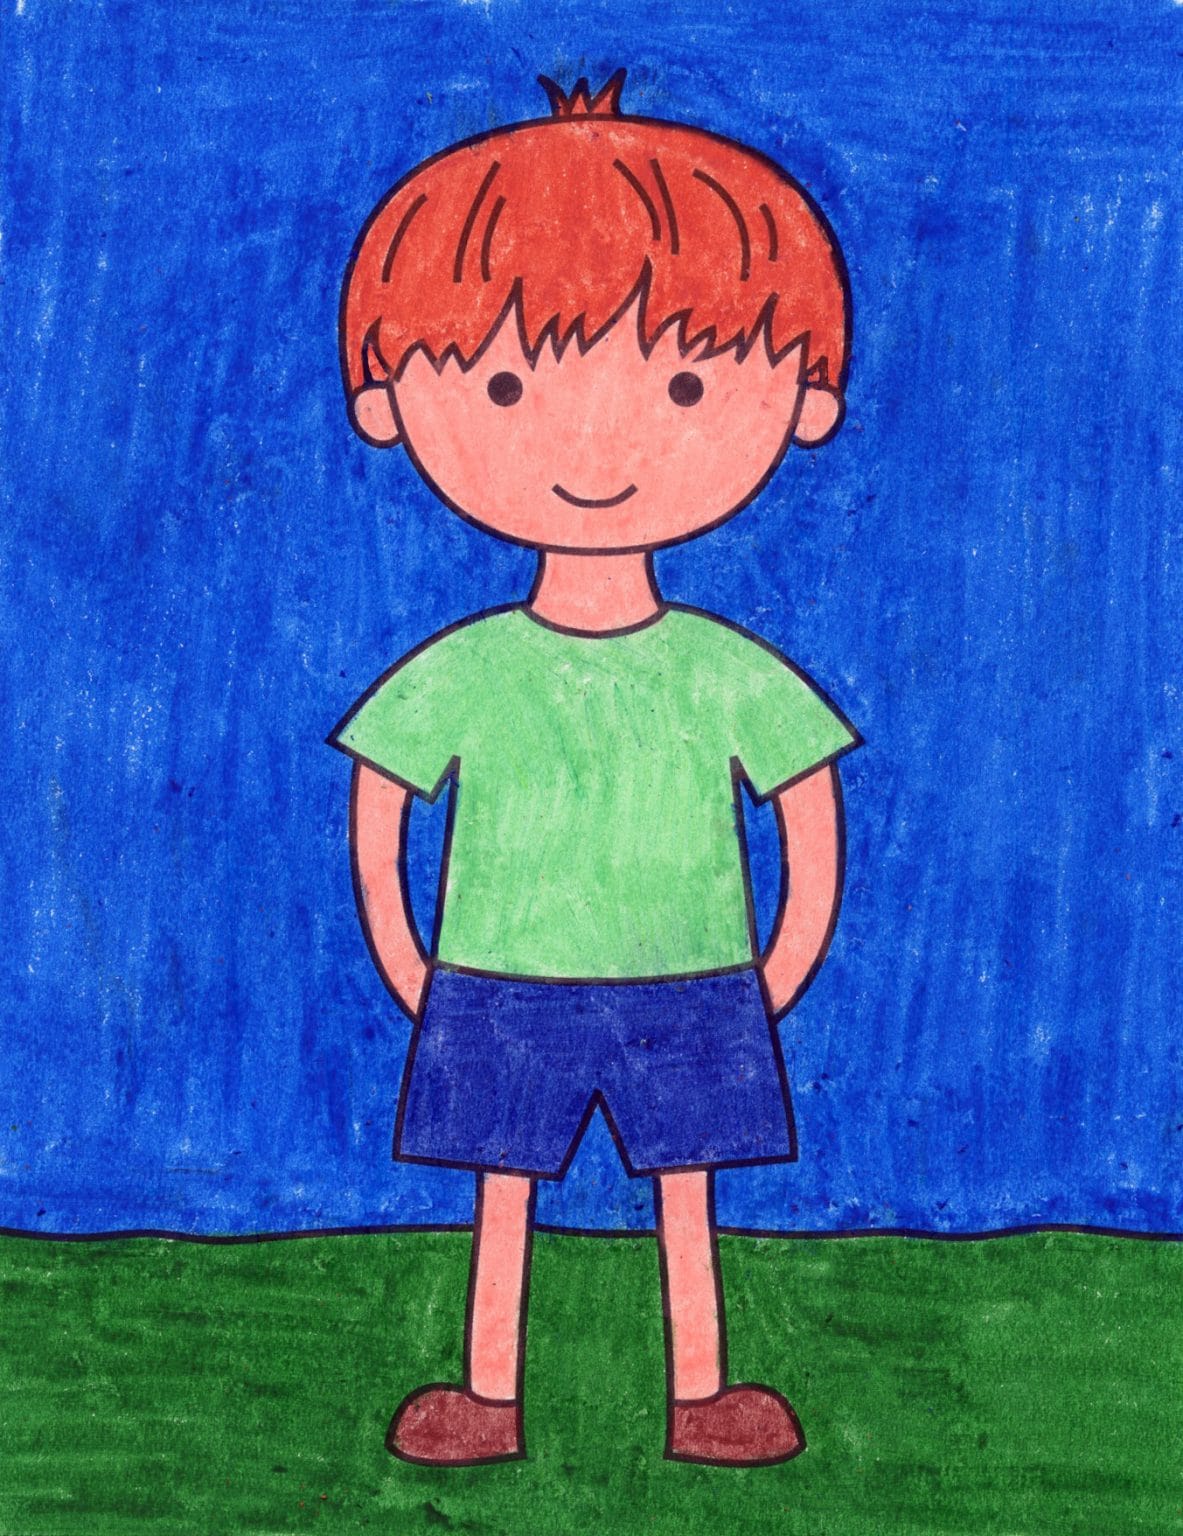 How to draw a boy in shorts